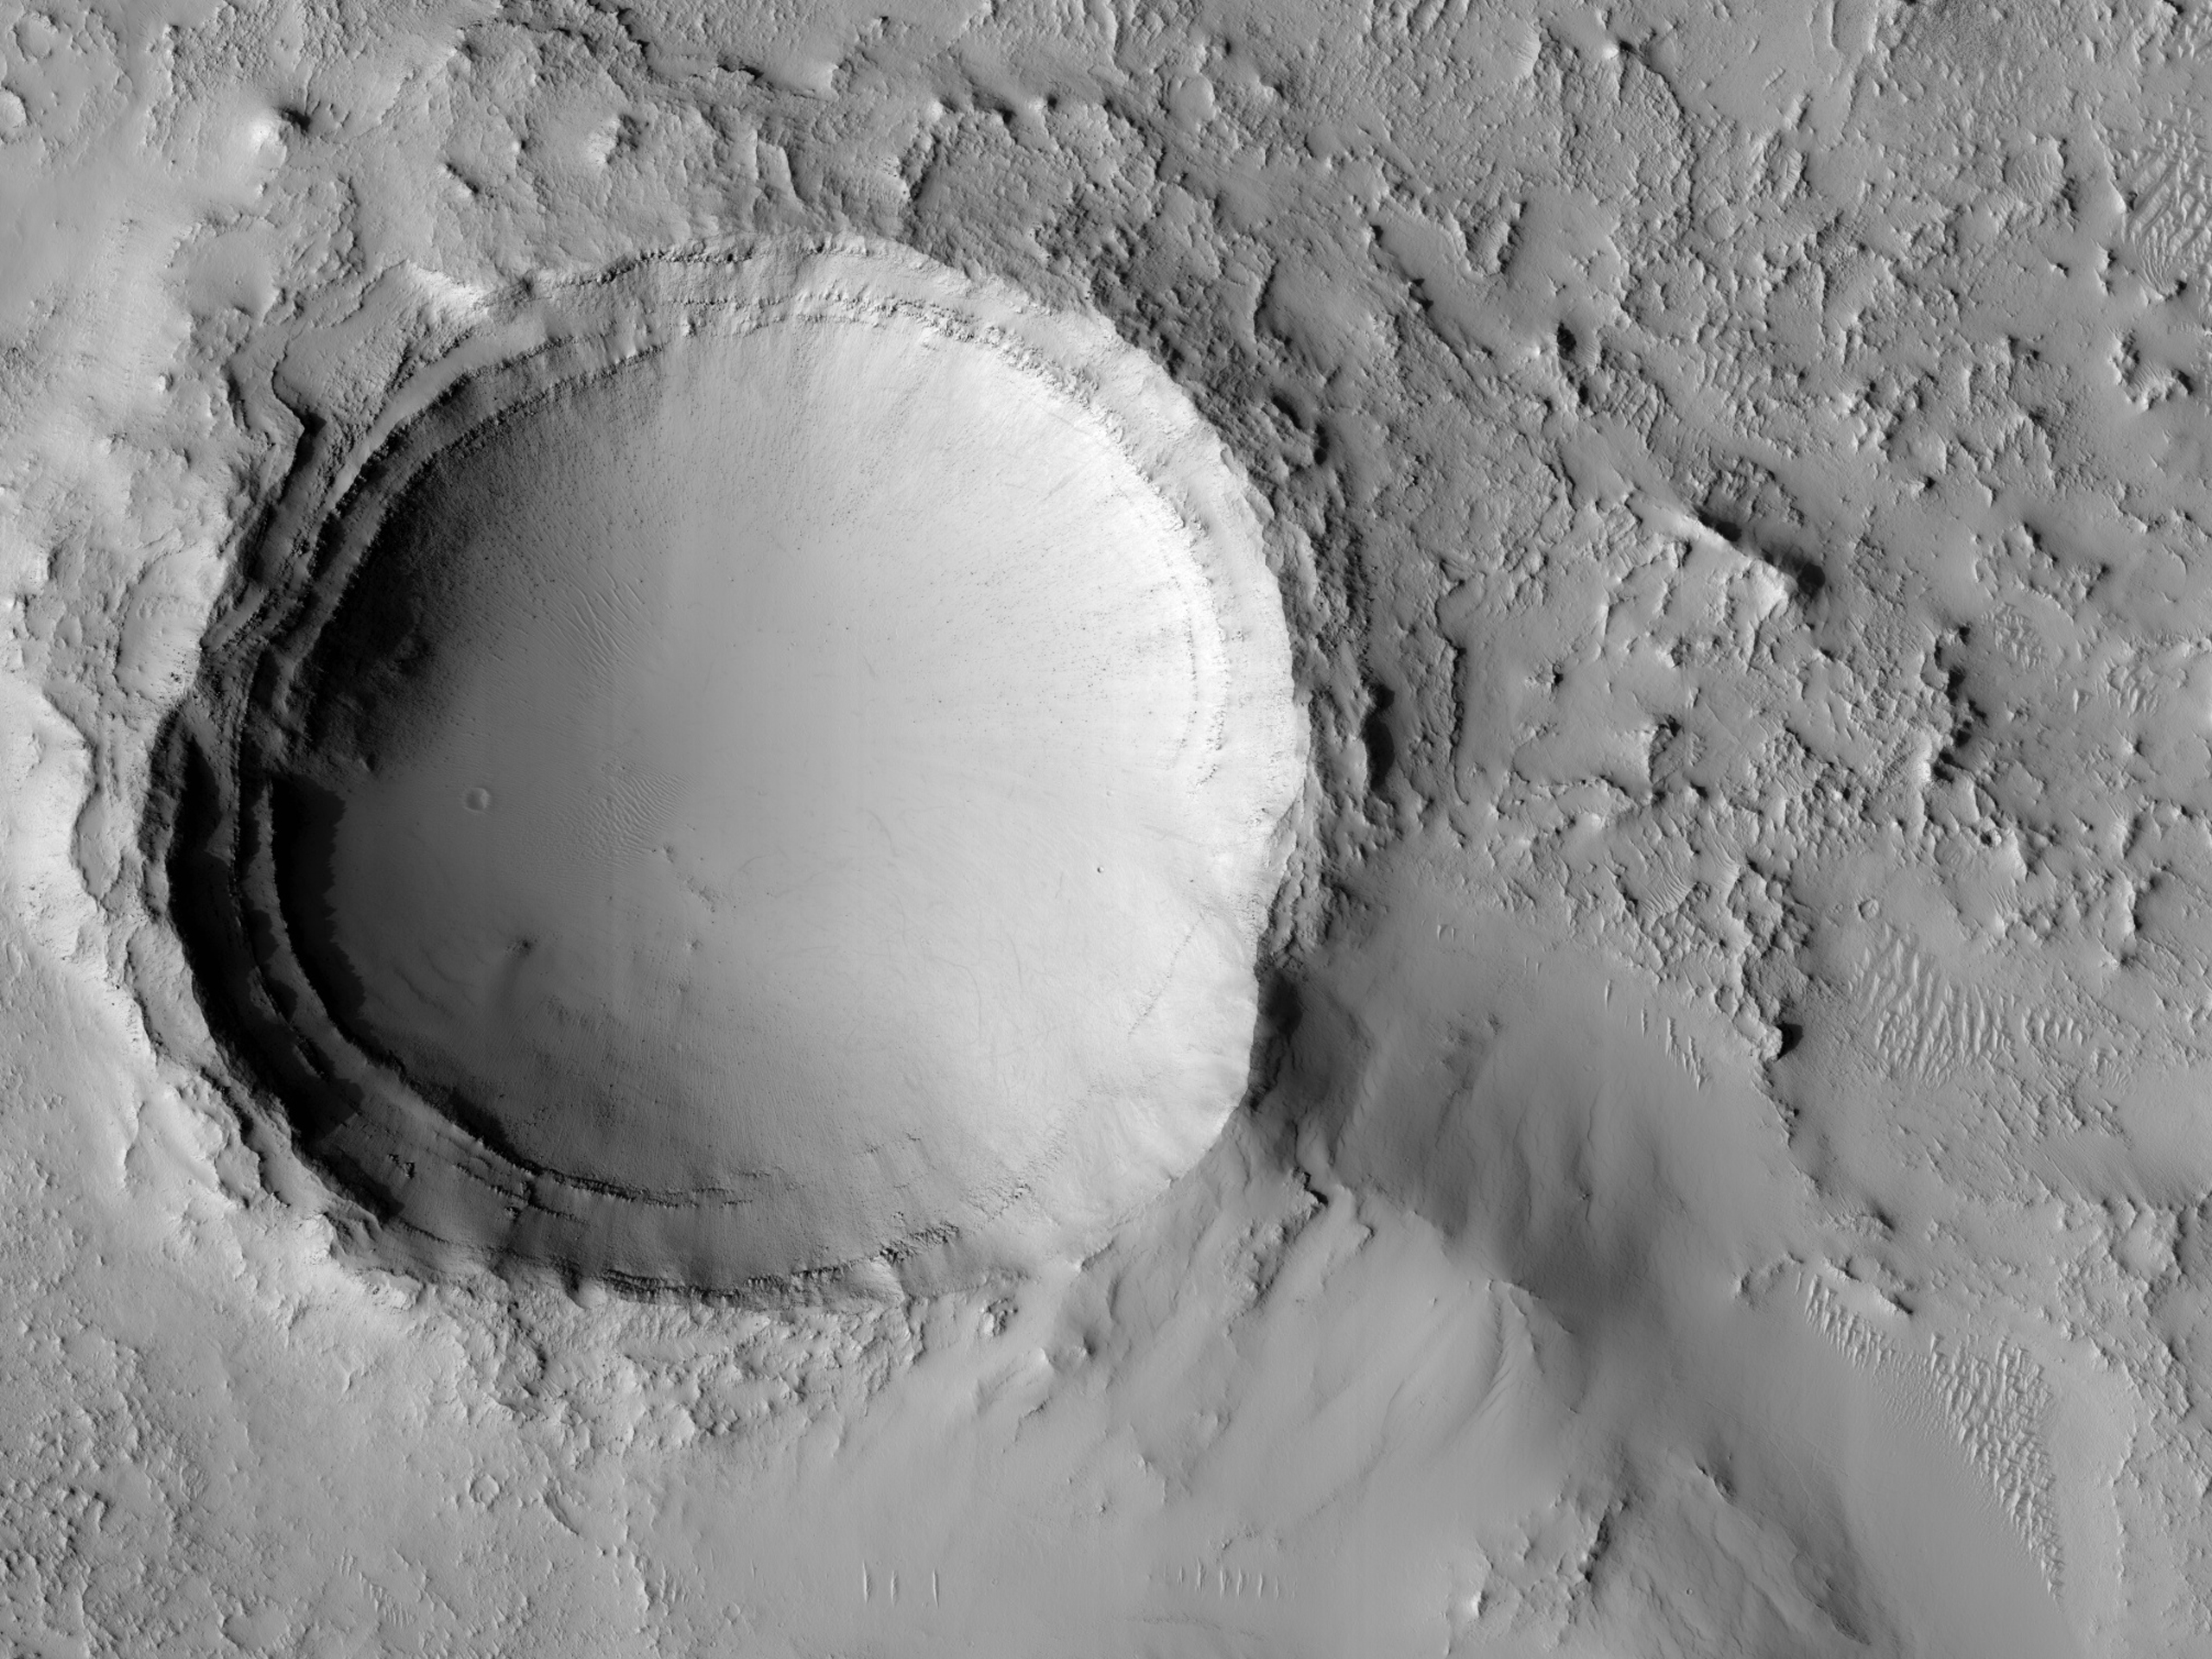 Layers in a Crater